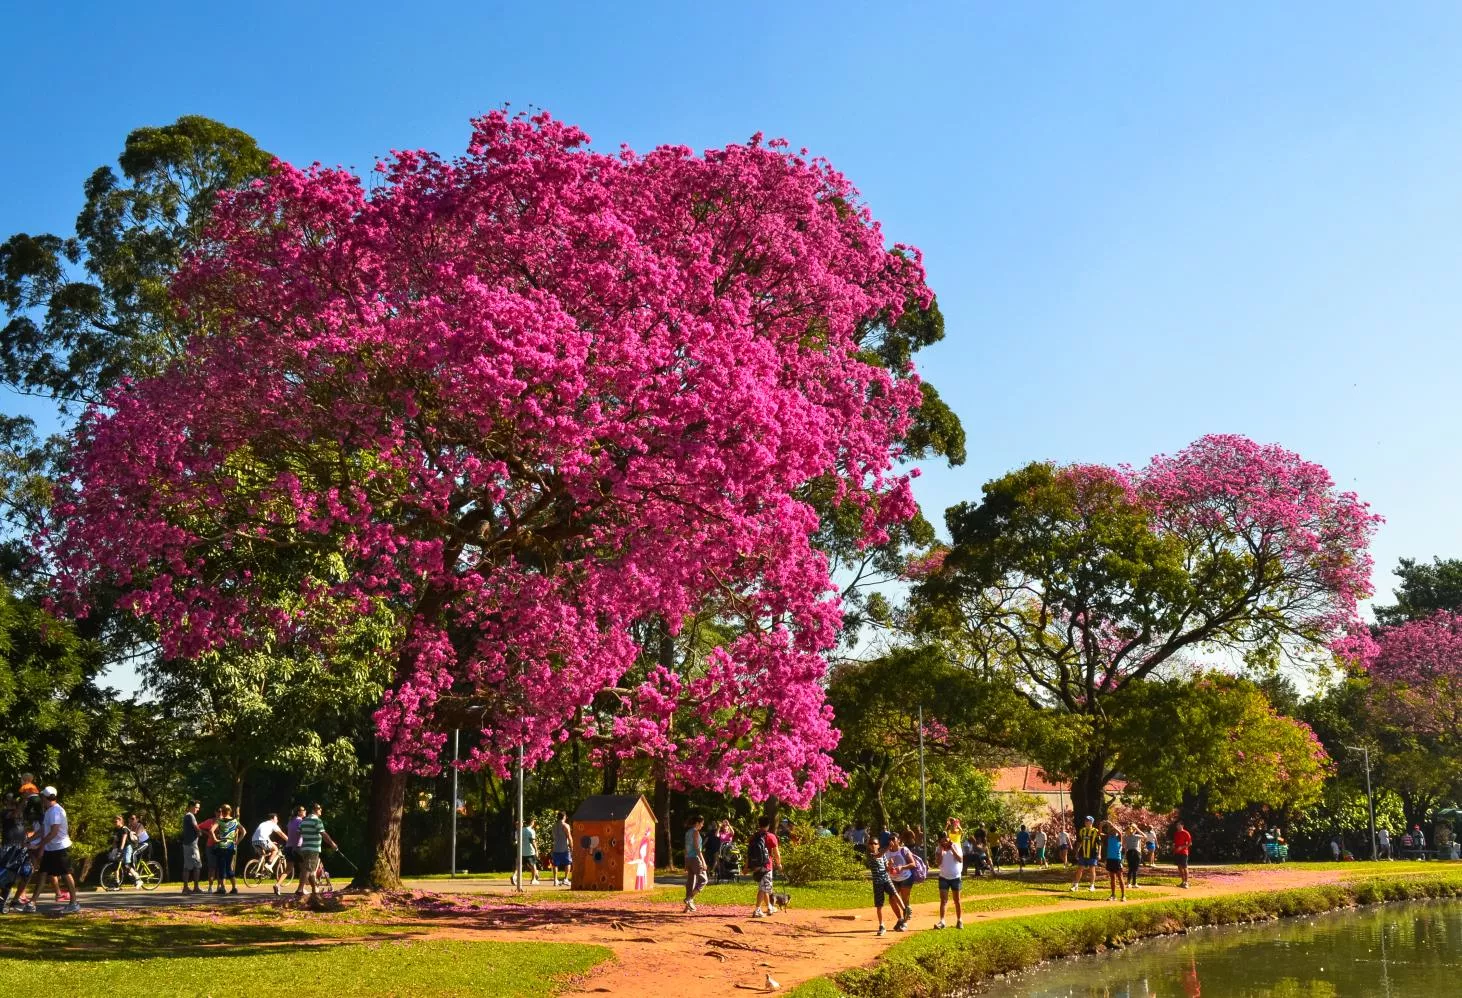 Ibirapuera Park in Brazil, South America | Parks - Rated 9.6